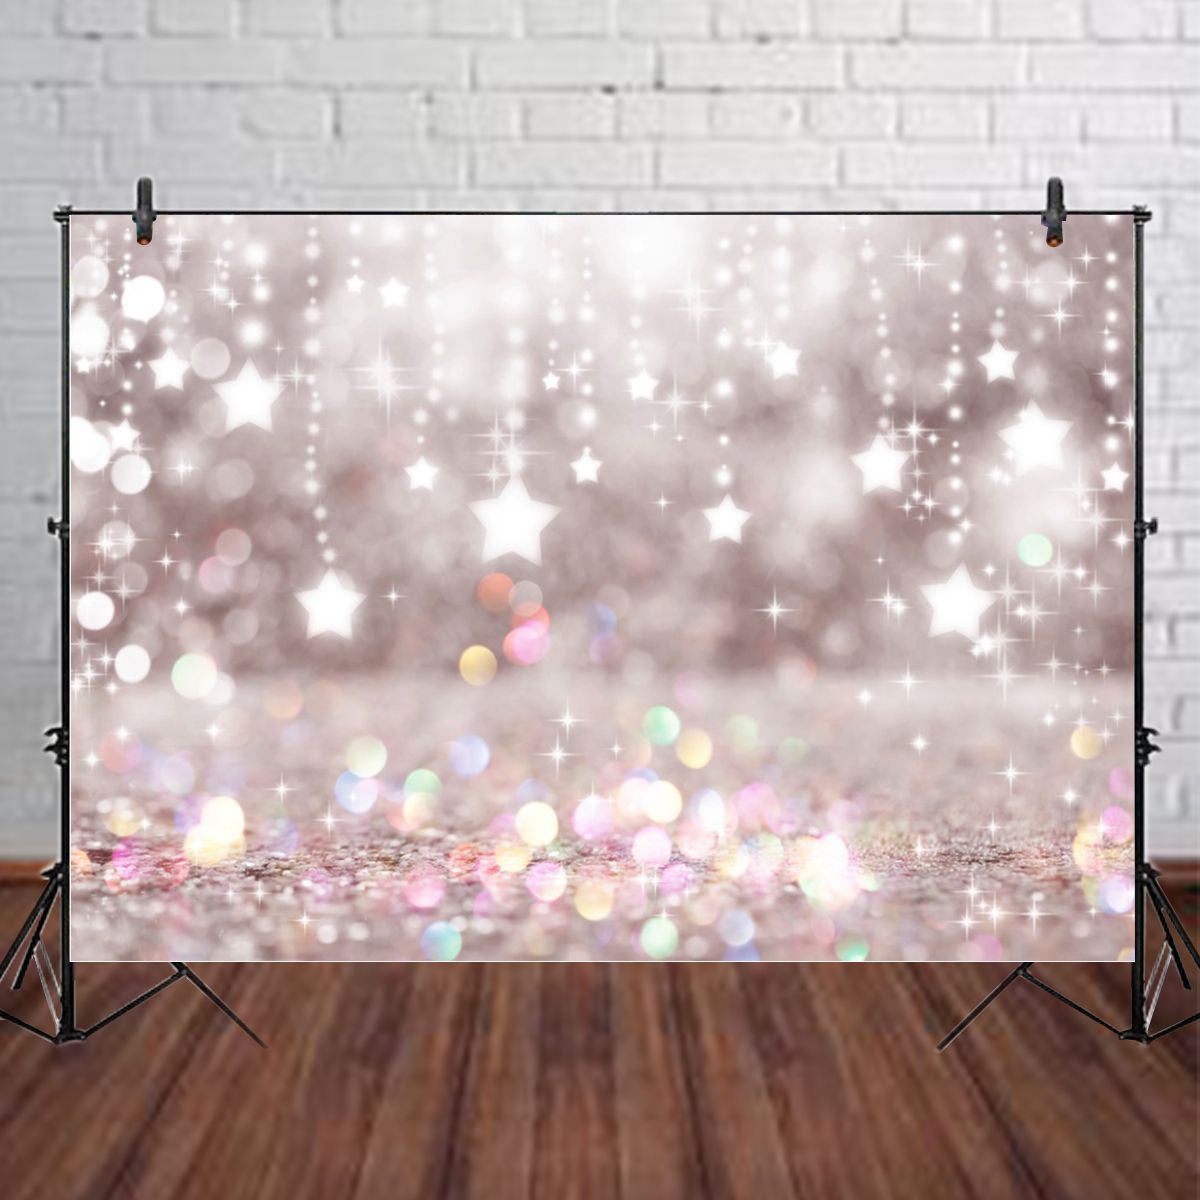 Dream-Star-Photography-Backdrop-Studio-Background-Cloth-Home-Party-Christmas-1717728